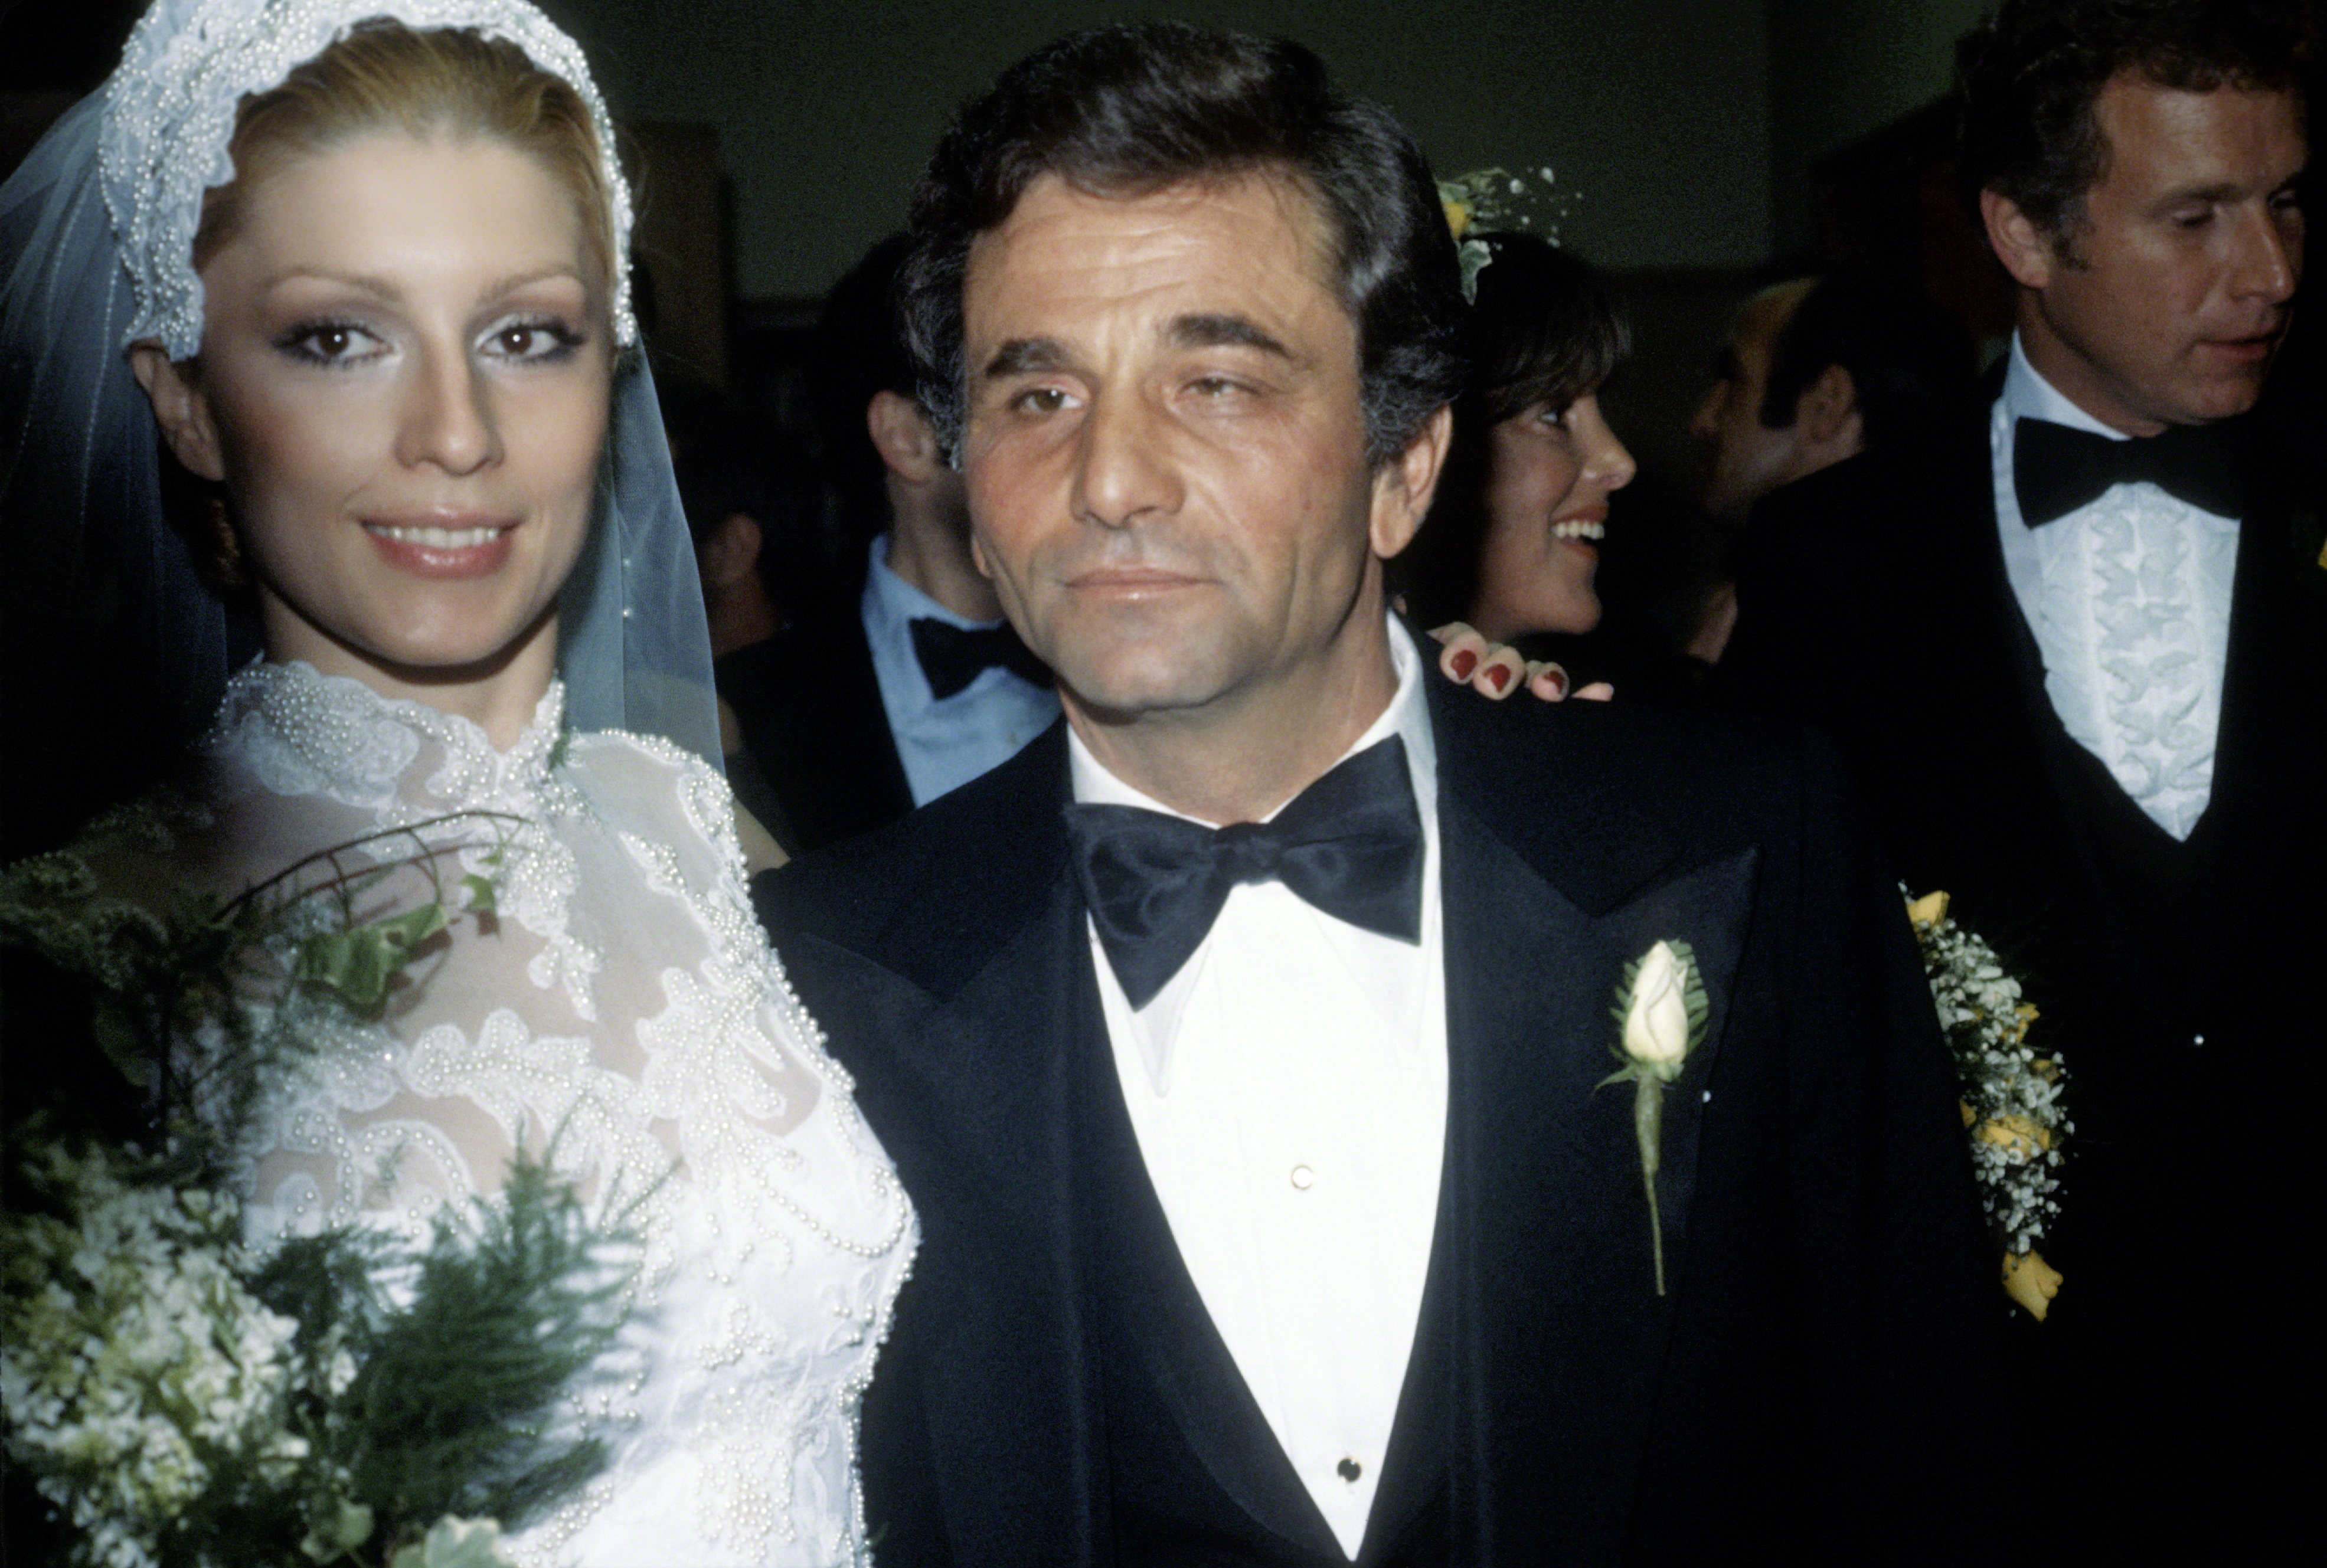 Peter Falk and Shera Danese on their wedding day in 1977 in Los Angeles, California. | Source: Getty Images